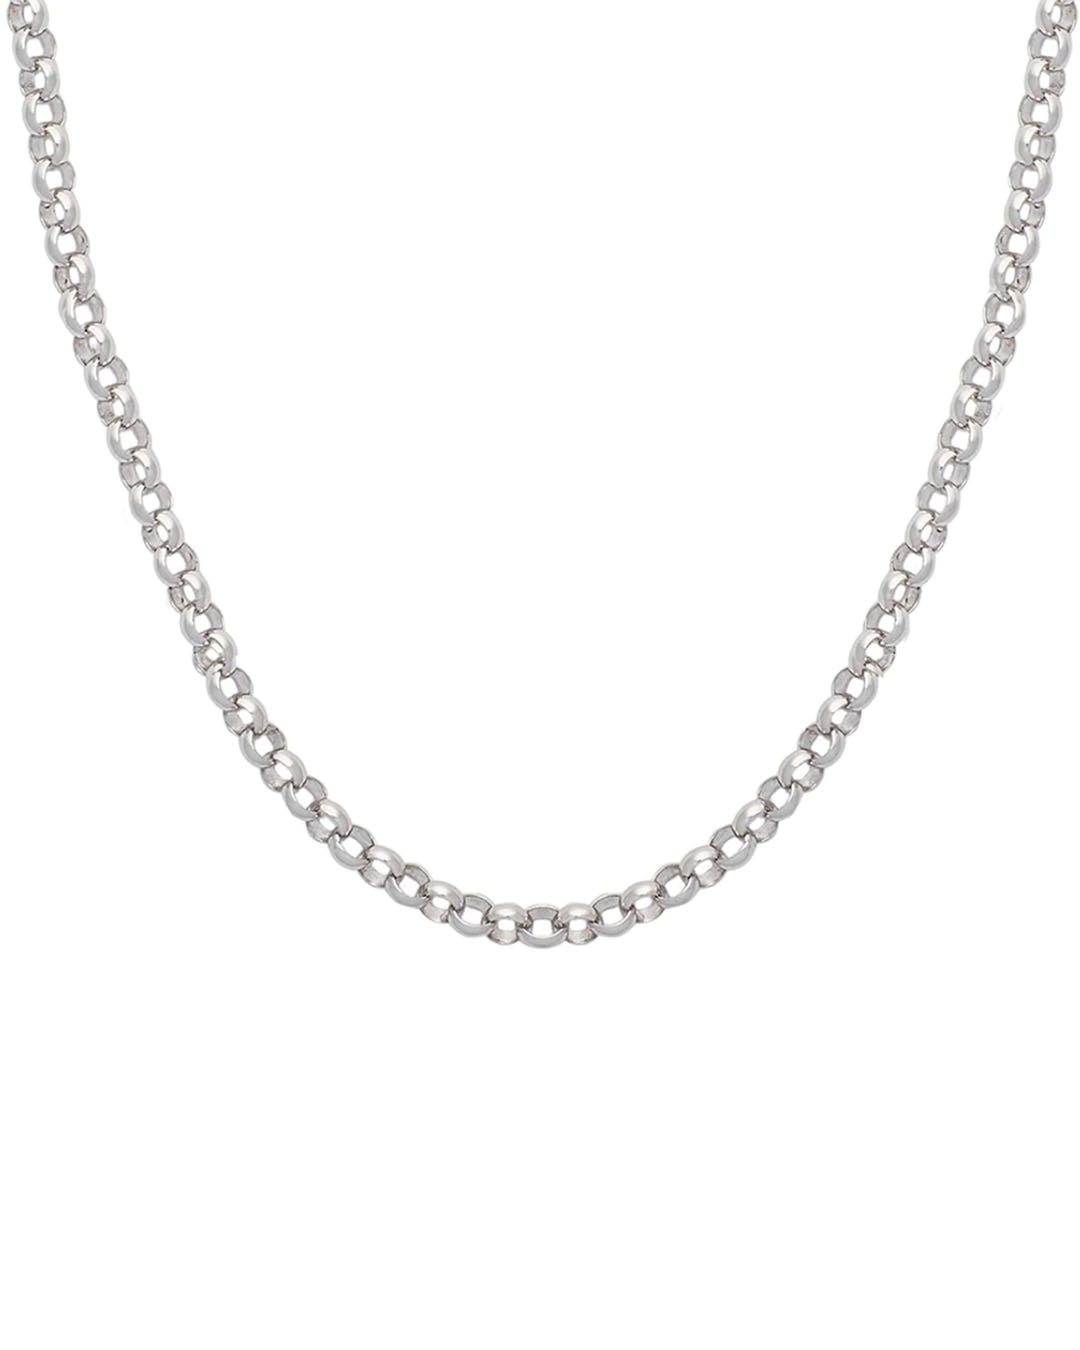 4mm Belcher Chain Necklace - Sterling Silver Jewellery by YCL Jewels - Prae Store